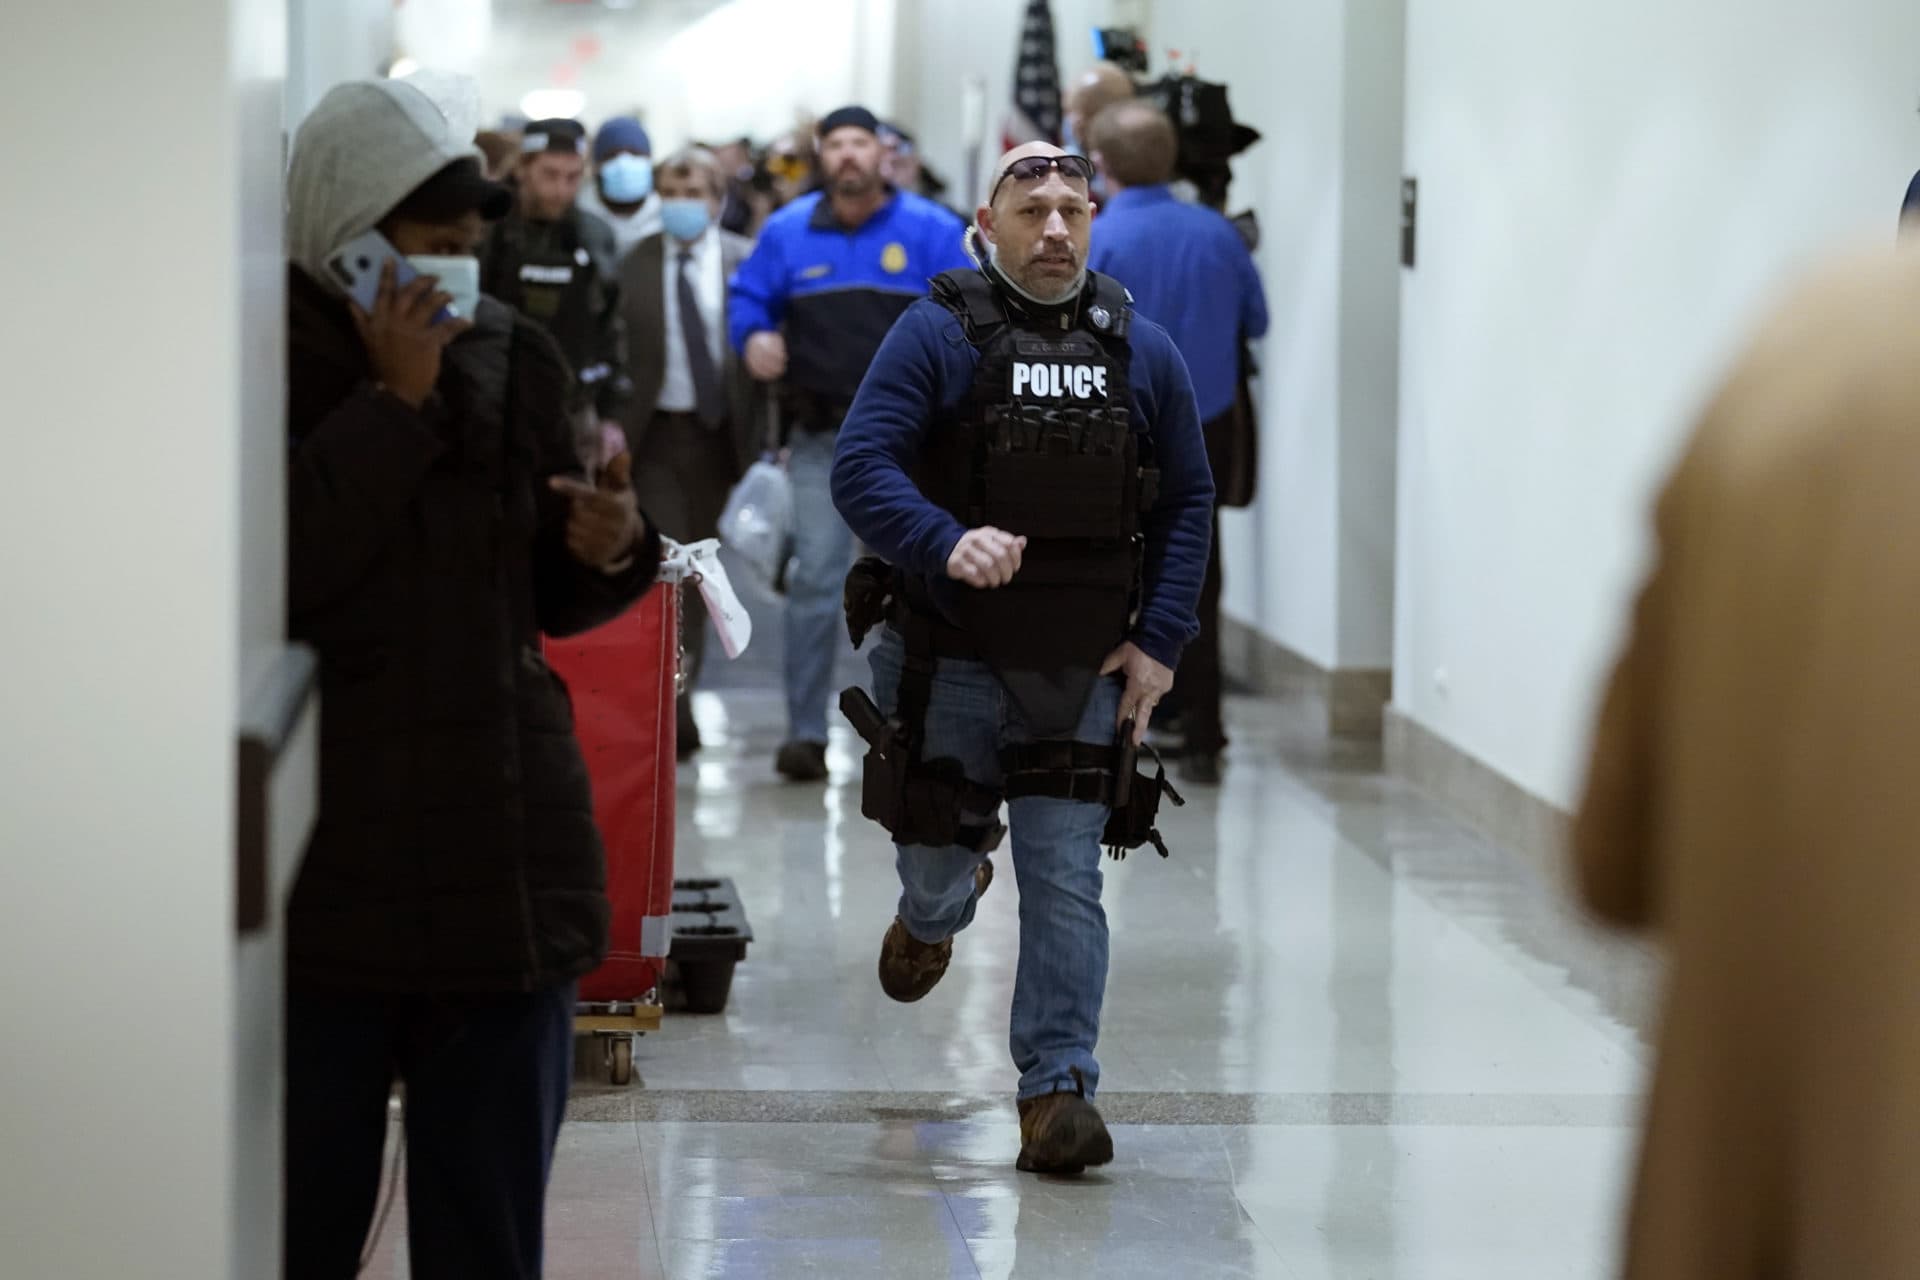 People run in the halls as protesters try to break into the House Chamber. (Andrew Harnik/AP)